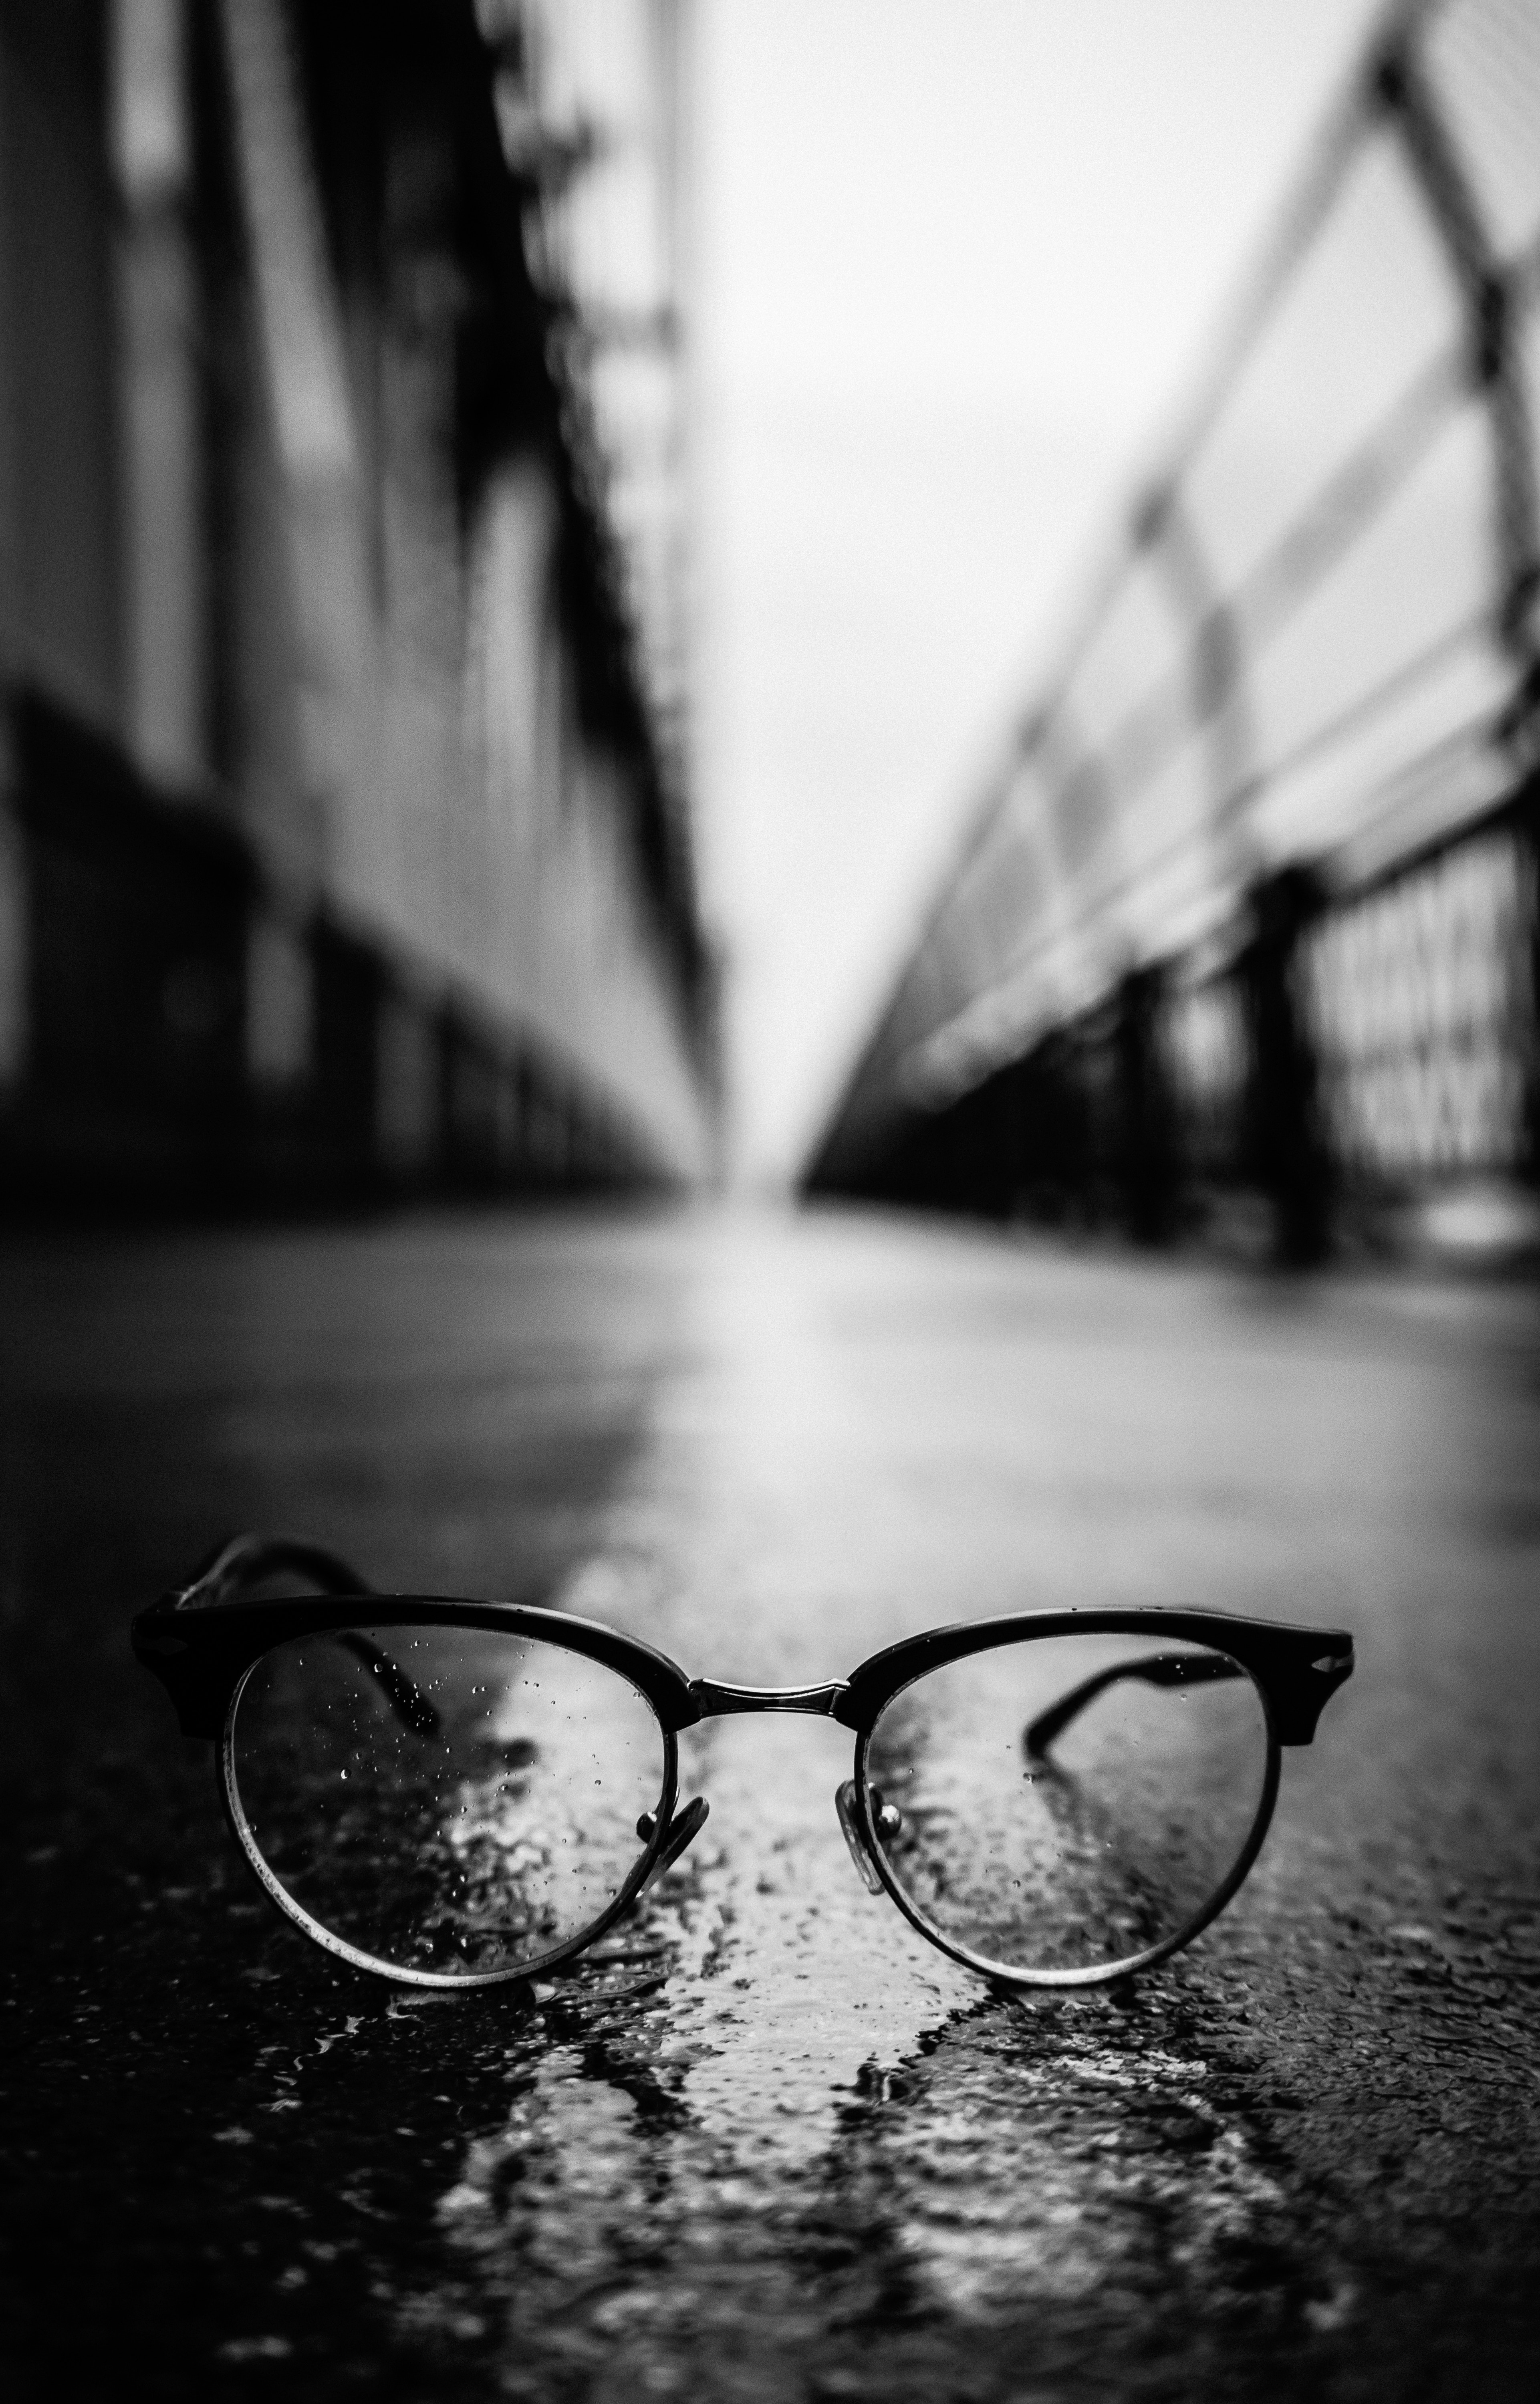 close up, bw, dark, chb, glasses, spectacles cellphone